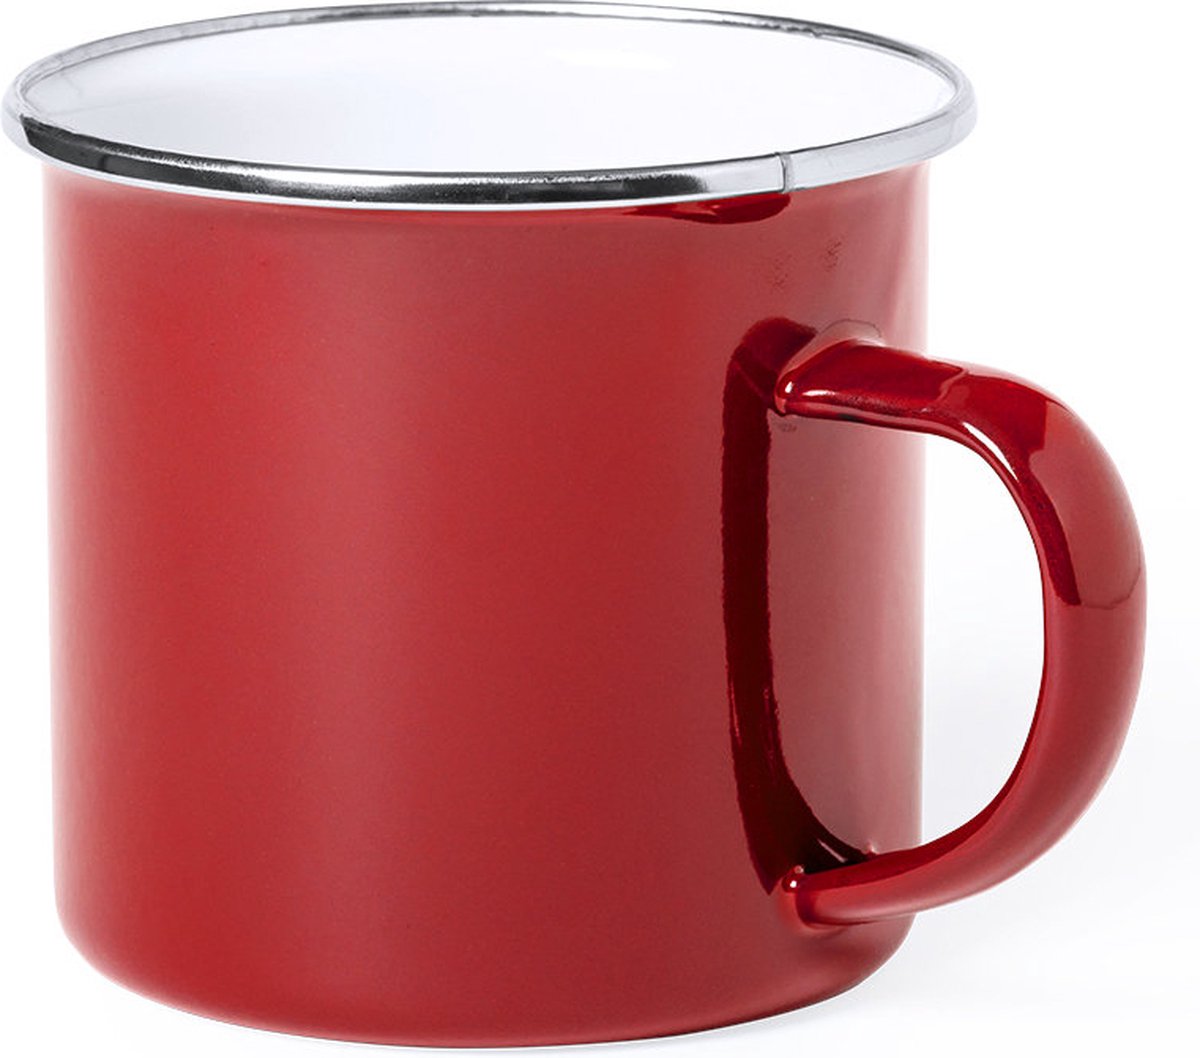 OneTrippel - Roest vrij staal - Koffiebeker - 380 ml - RVS- Rood